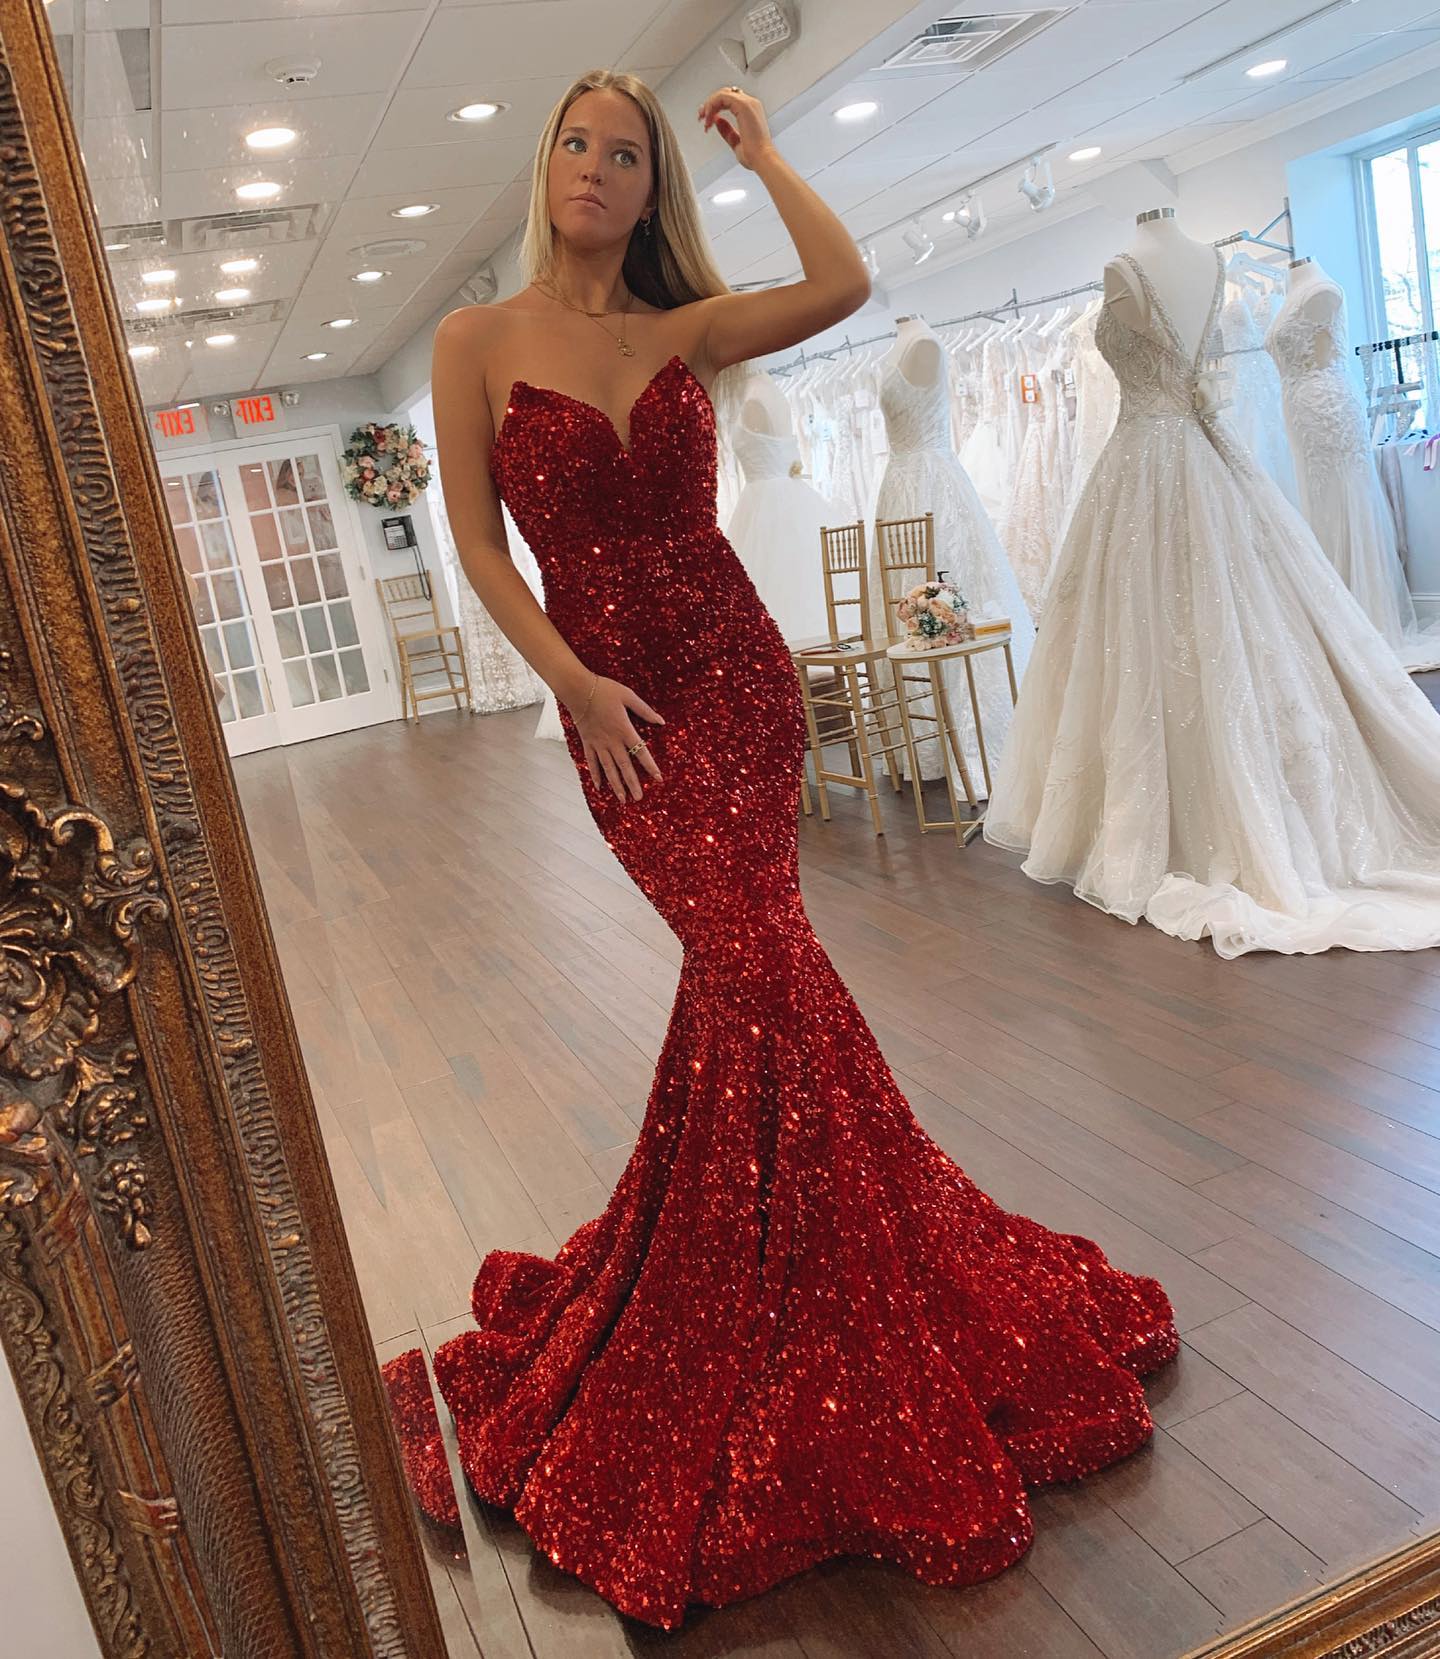 Strapless Velvet Sequin Prom Dress with V Cut Shimmery Sparkling Lady Preteen Teen Girl Pageant Gown Formal Party Wedding Guest Red Capet Runway Royal Purple Red Turq